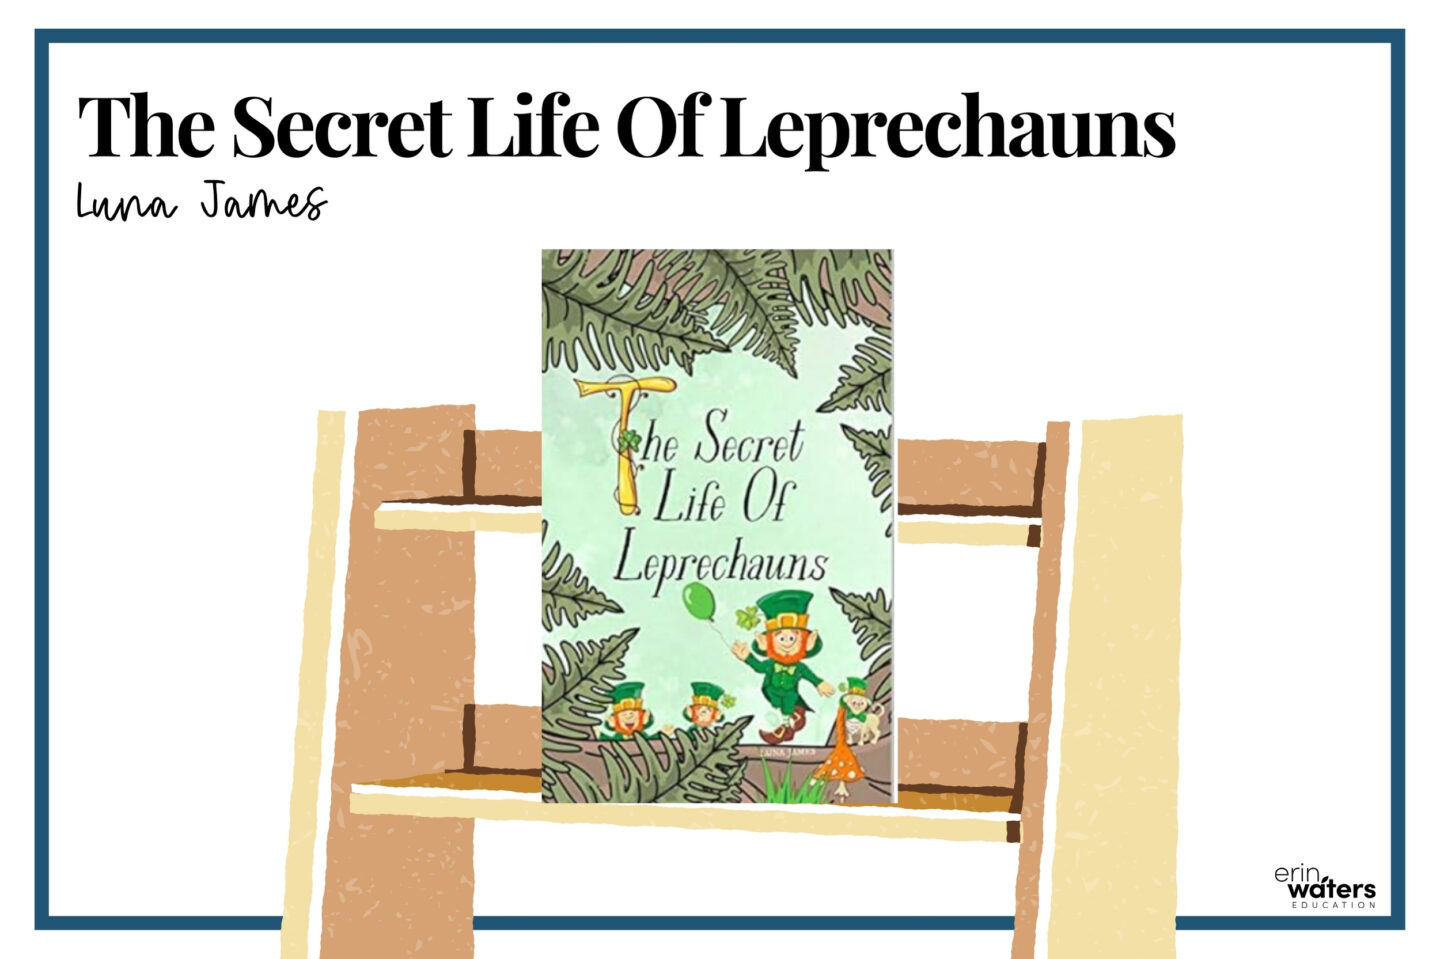 st. patrick's day books blog post image depicting the cover image of "The Secret Life of Leprechauns" on a bookshelf